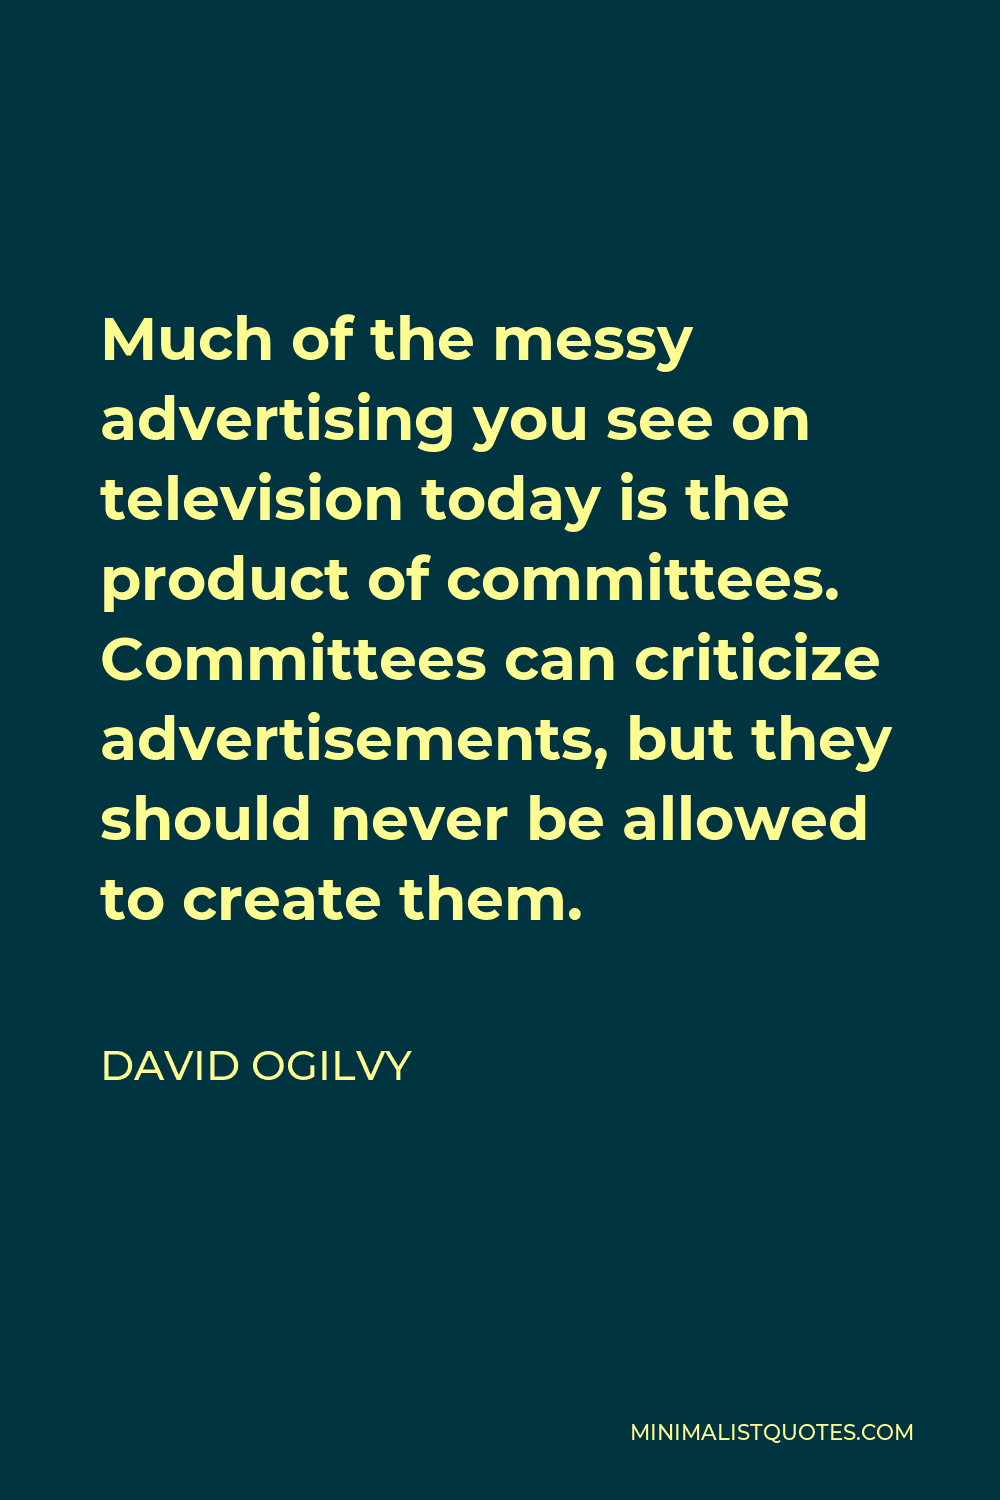 David Ogilvy Quote - Much of the messy advertising you see on television today is the product of committees. Committees can criticize advertisements, but they should never be allowed to create them.